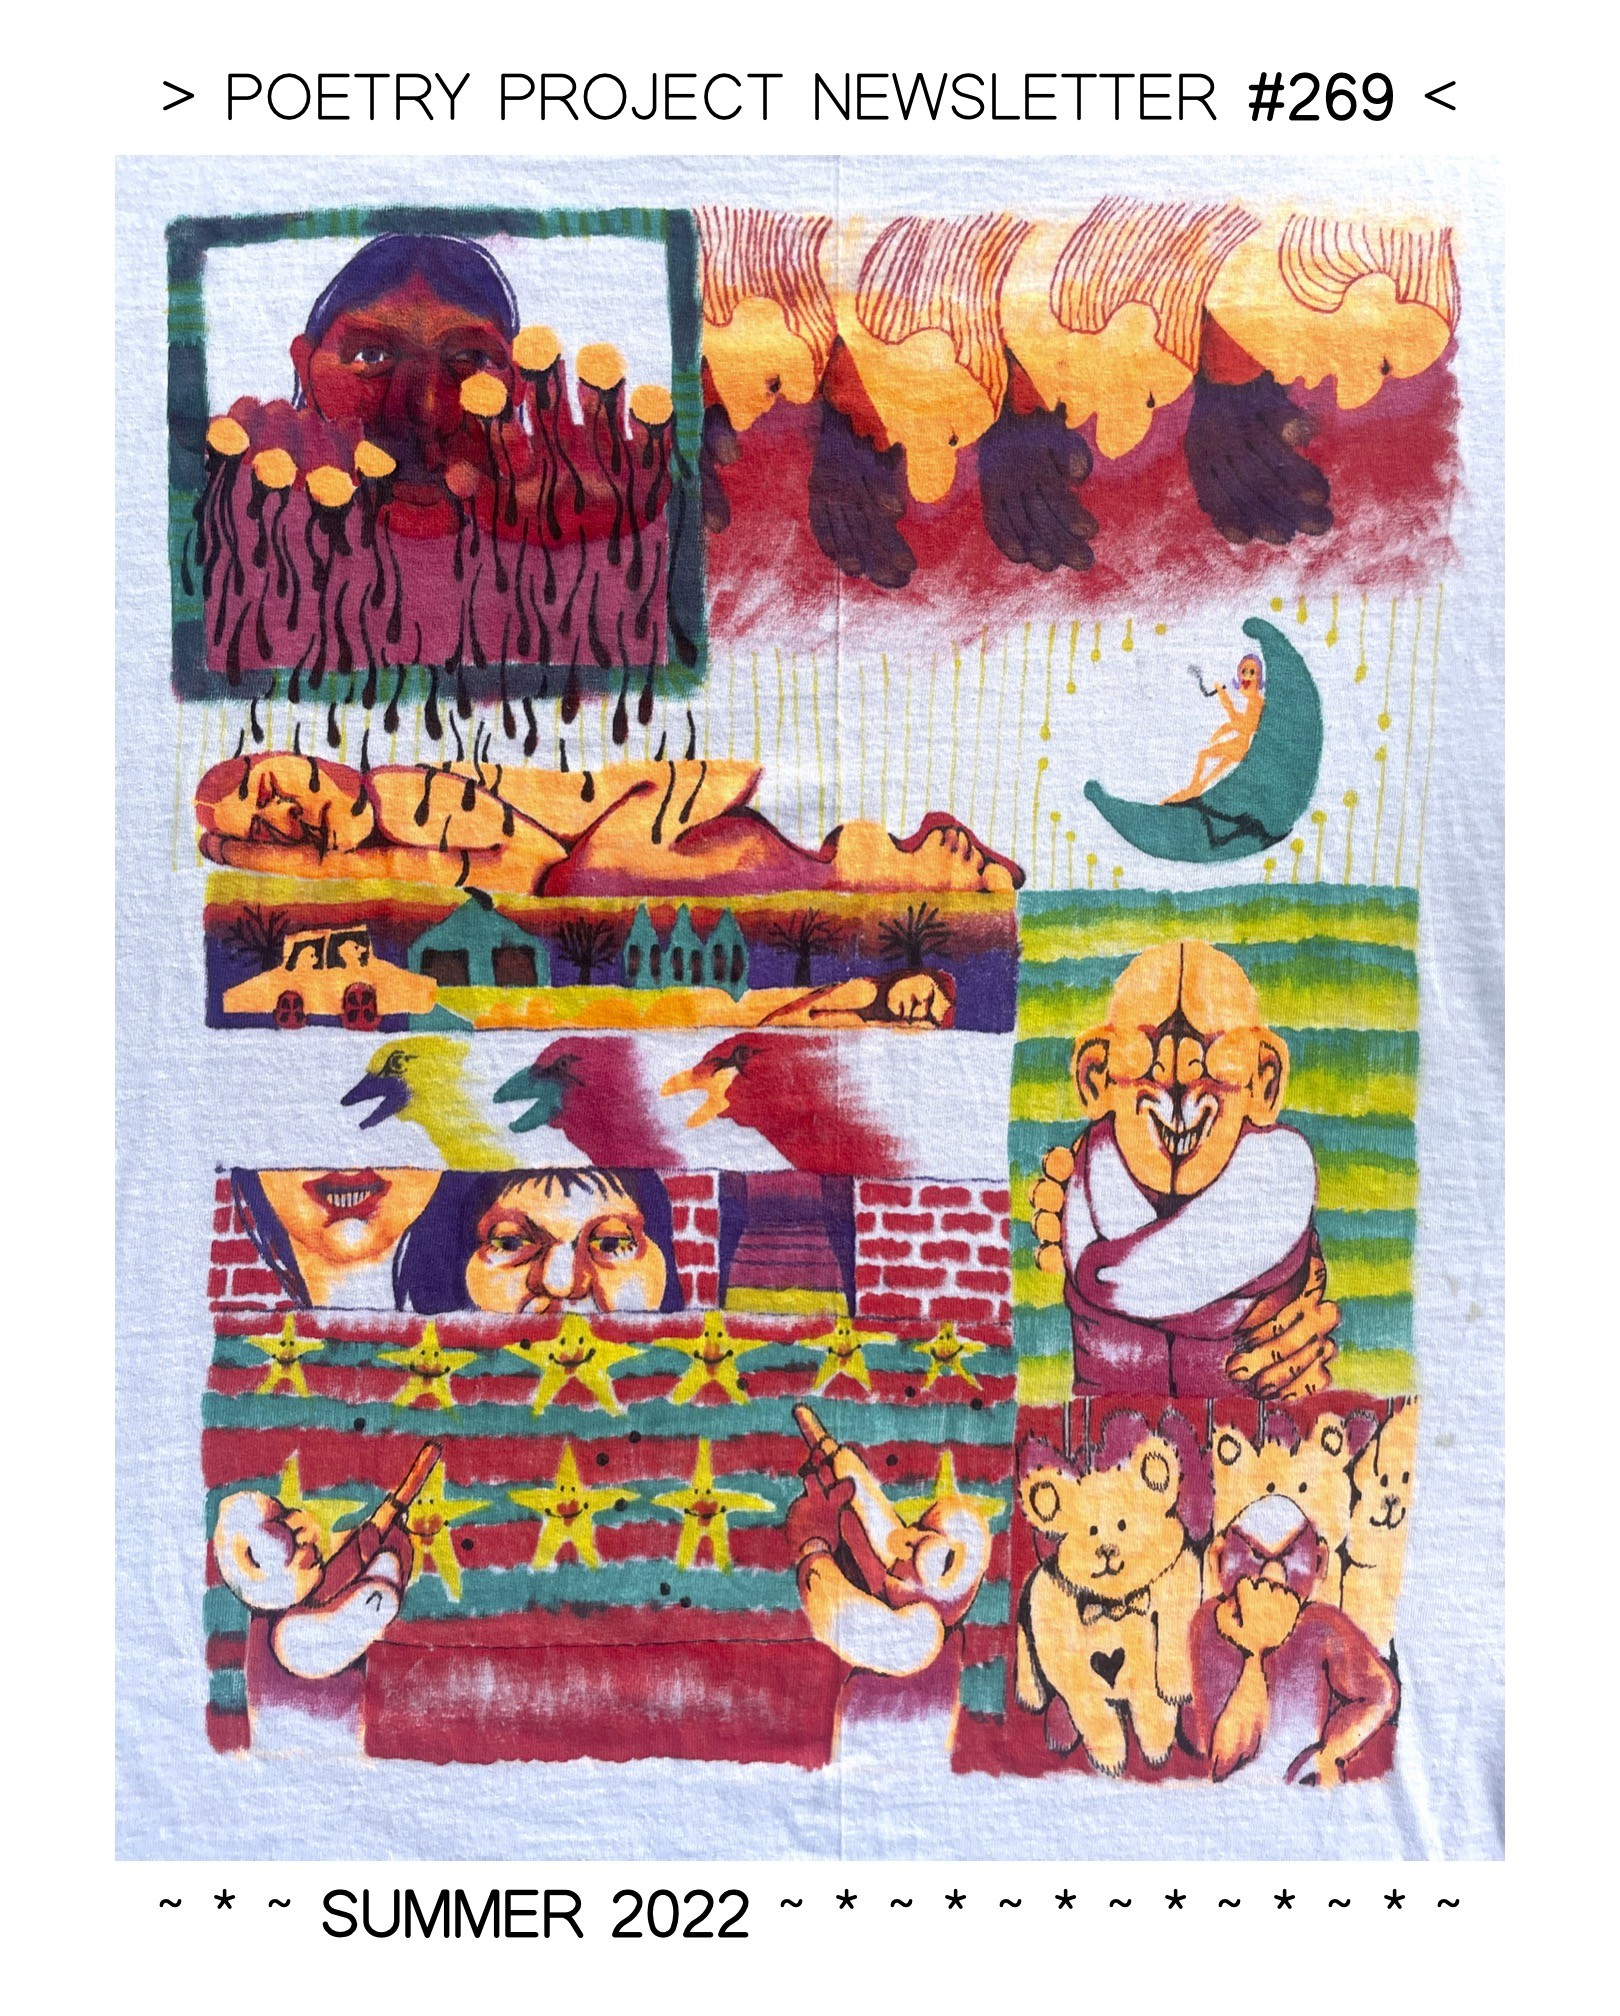 Sarah Kirby's artwork, an ink and paint piece on white cloth background, composes a dreamscape from collaged modules: in the top left corner, a god-like figure seems to rain from its fingertips; in the top right corner, four more gods breathe wind into a red sky. A green moon hands below, a landscape and a car driving through the night; a grinning man in a straightjacket. Three birds from the neck up, in a repeated rhythm; a woman's face cut into two parts, she's looking at us. Rows of smiling stars threatened by soldiers with guns. And in the bottom row, a cluster of teddy bears. The main colors are: yellows, cool green, and various shades of red.